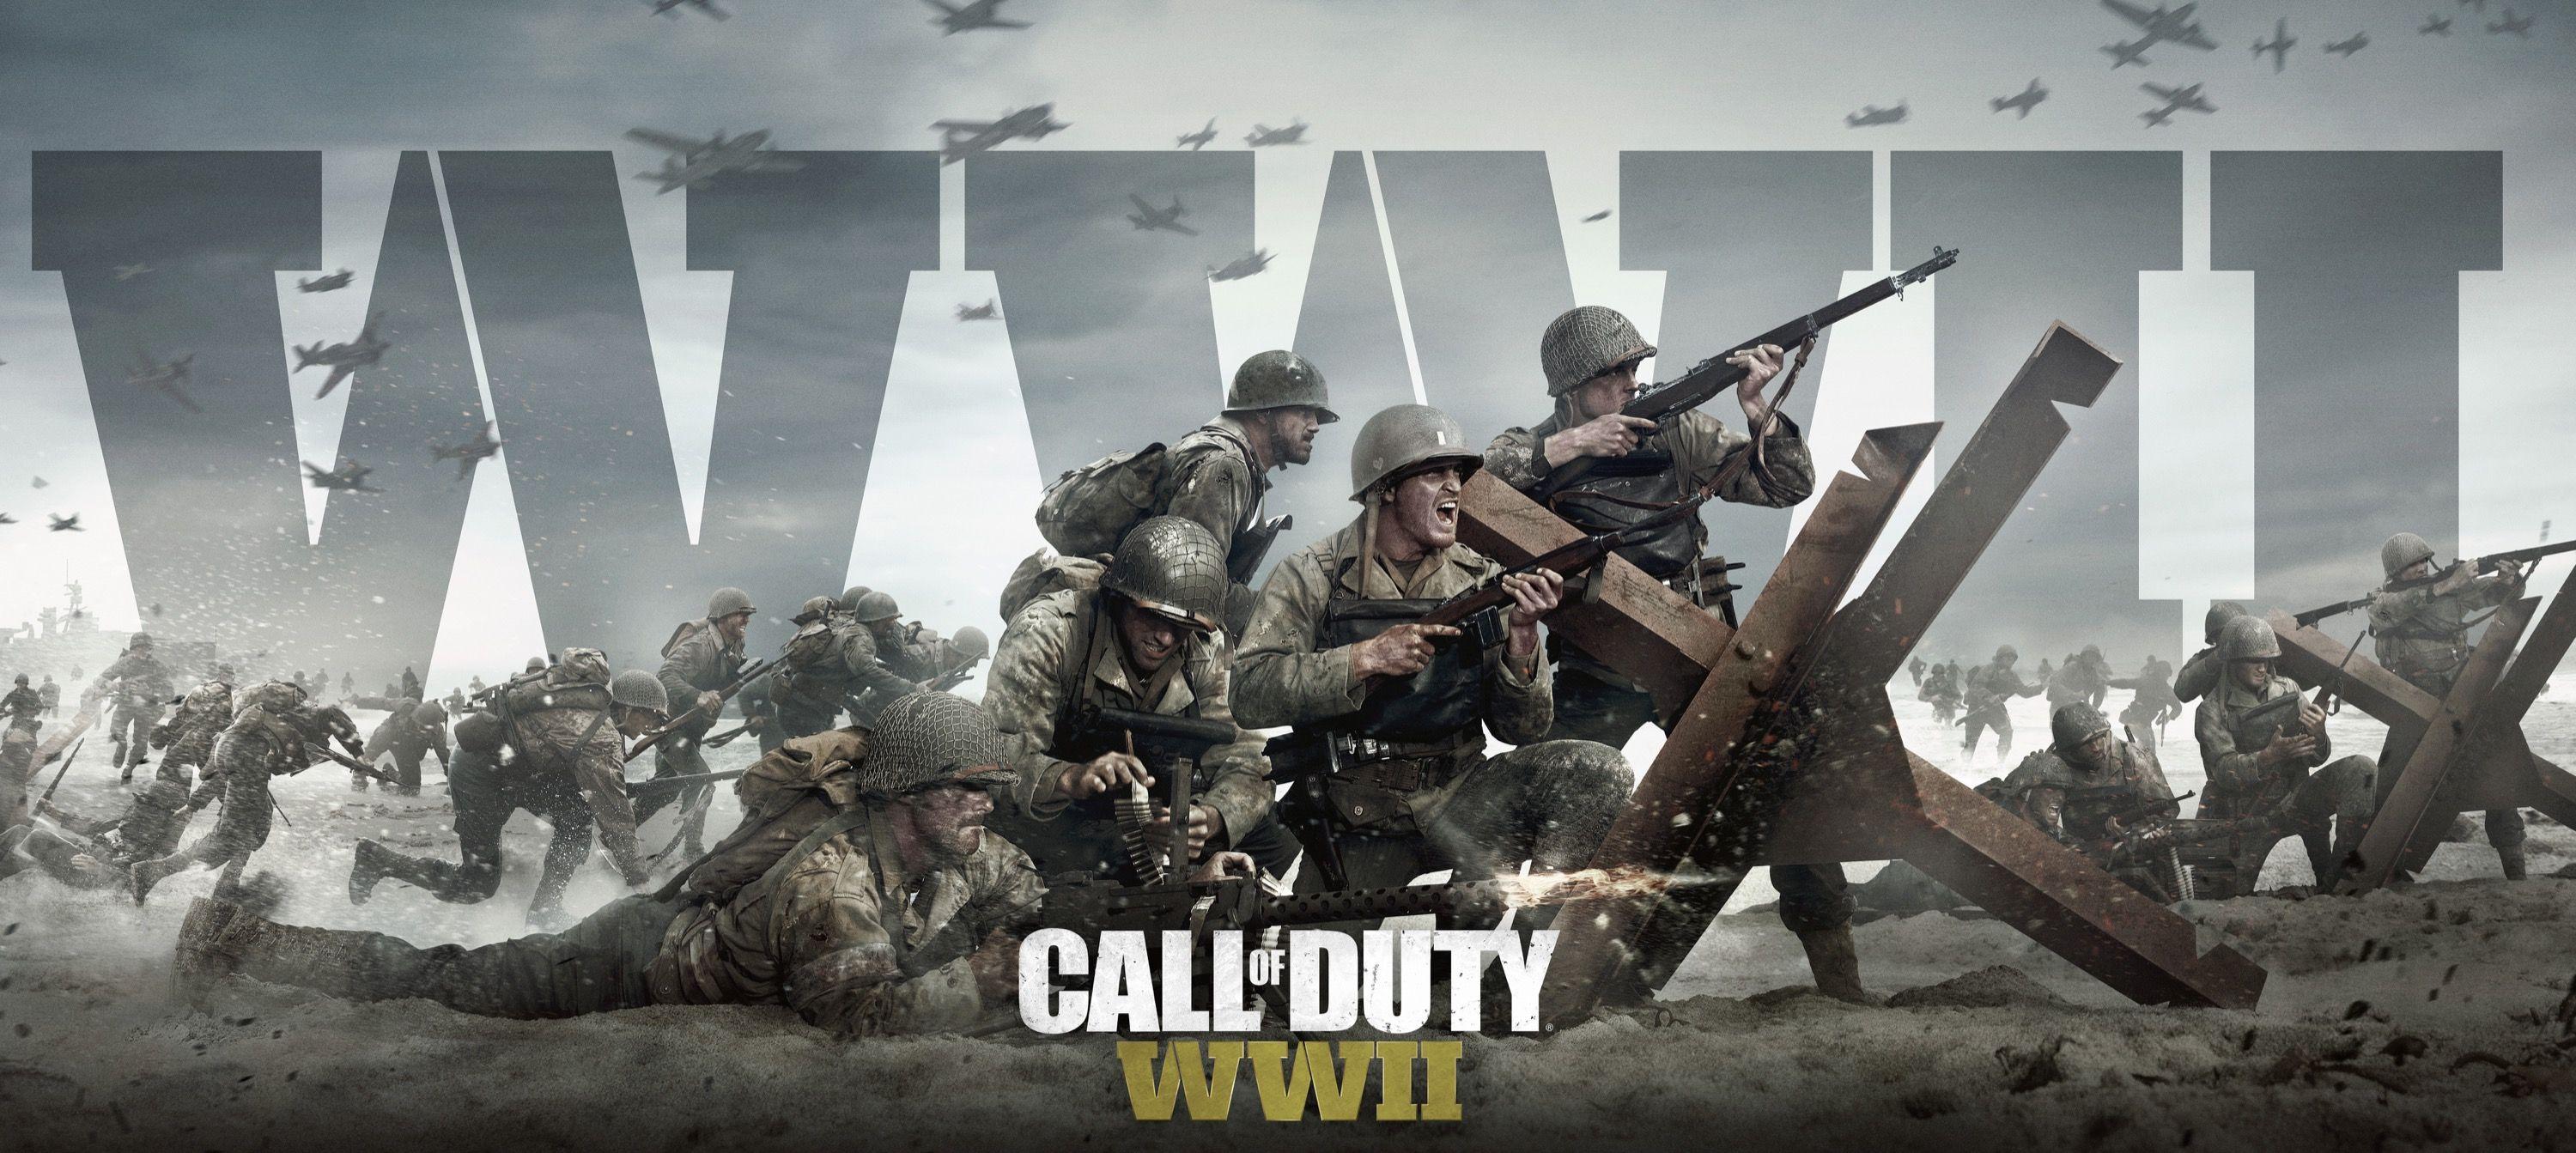 Call of Duty: WWII HD Wallpaper and Background Image